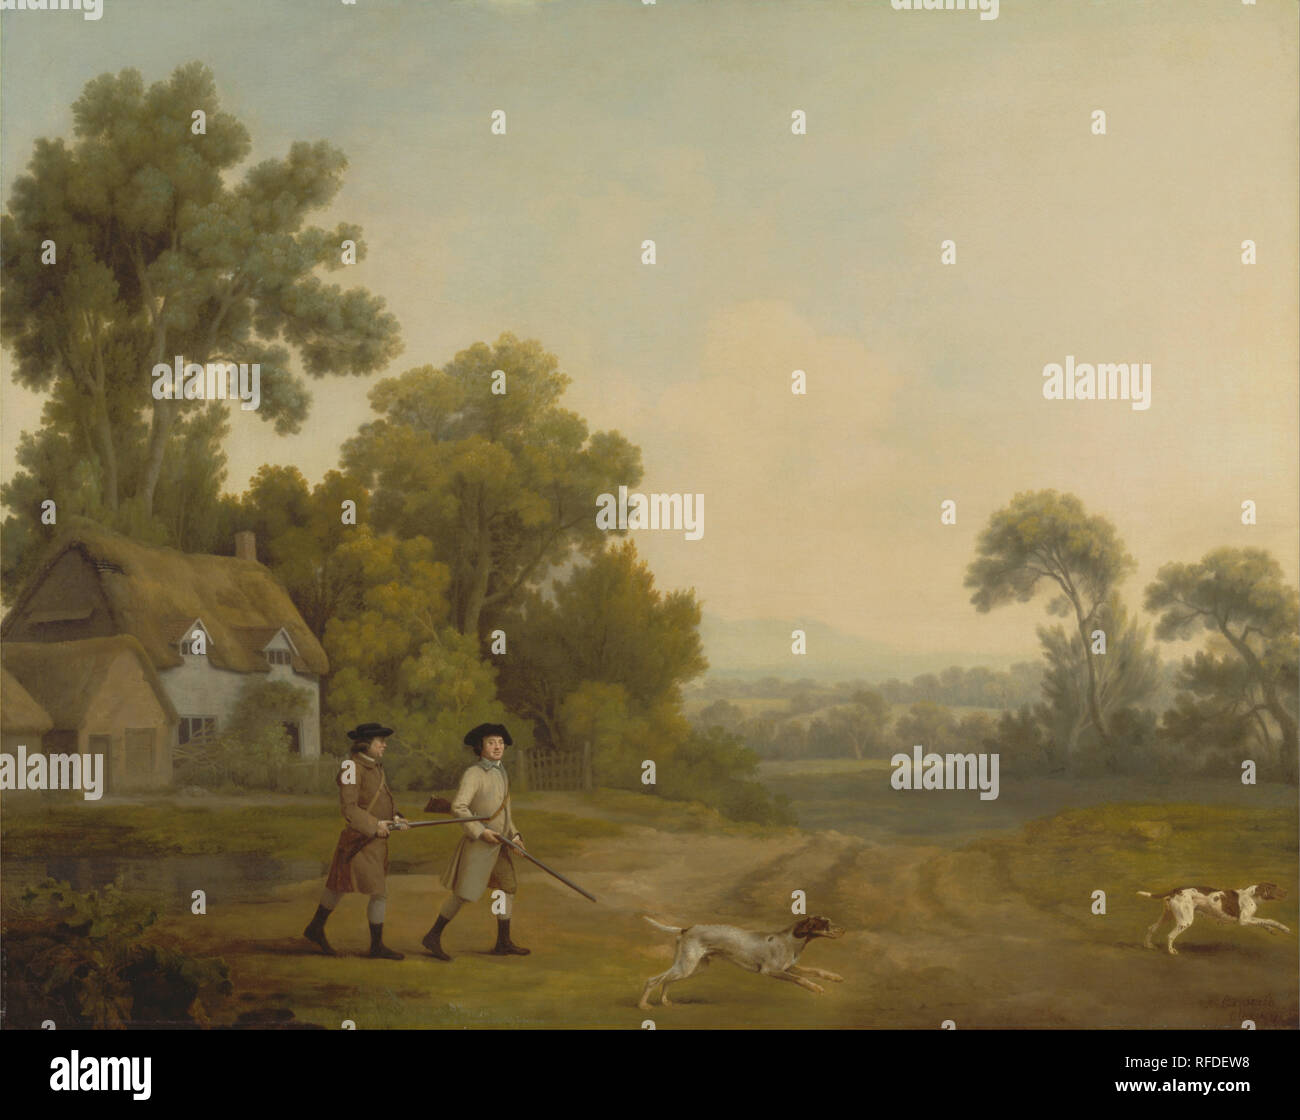 Two Gentlemen Going a Shooting. Date/Period: 1768. Painting. Oil on canvas. Height: 1,014 mm (39.92 in); Width: 1,272 mm (50.07 in). Author: George Stubbs. Stock Photo